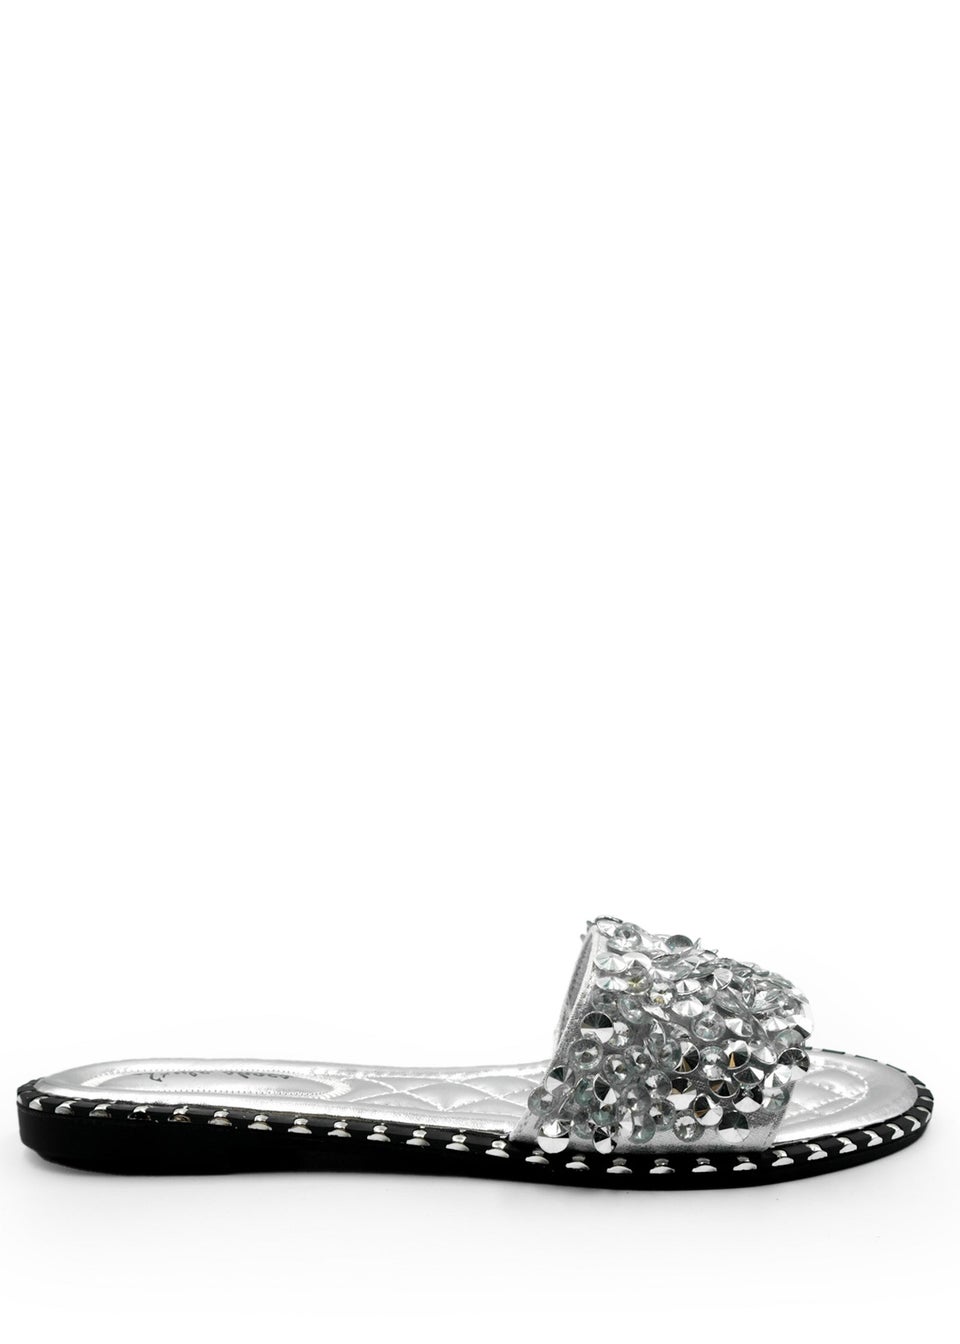 Where's That From Silver Belle Diamante Sparkly Flat Sliders